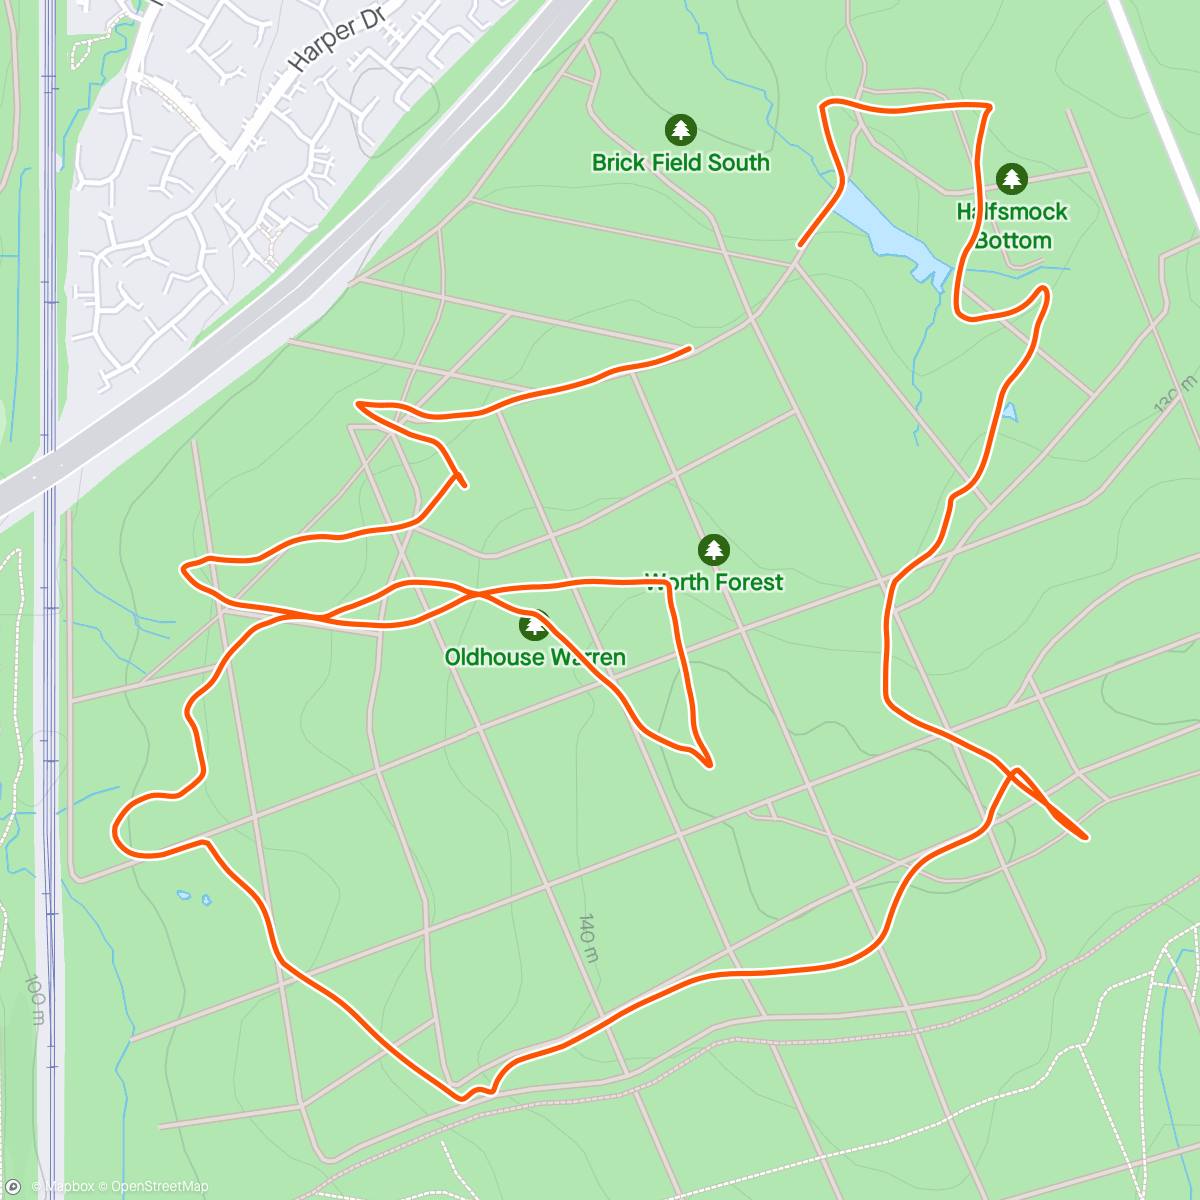 Mappa dell'attività Old House. Straight lines, small mistake on 18, focused on pushing myself and not being a lazy so and so. Super enjoyable course thanks Garry.